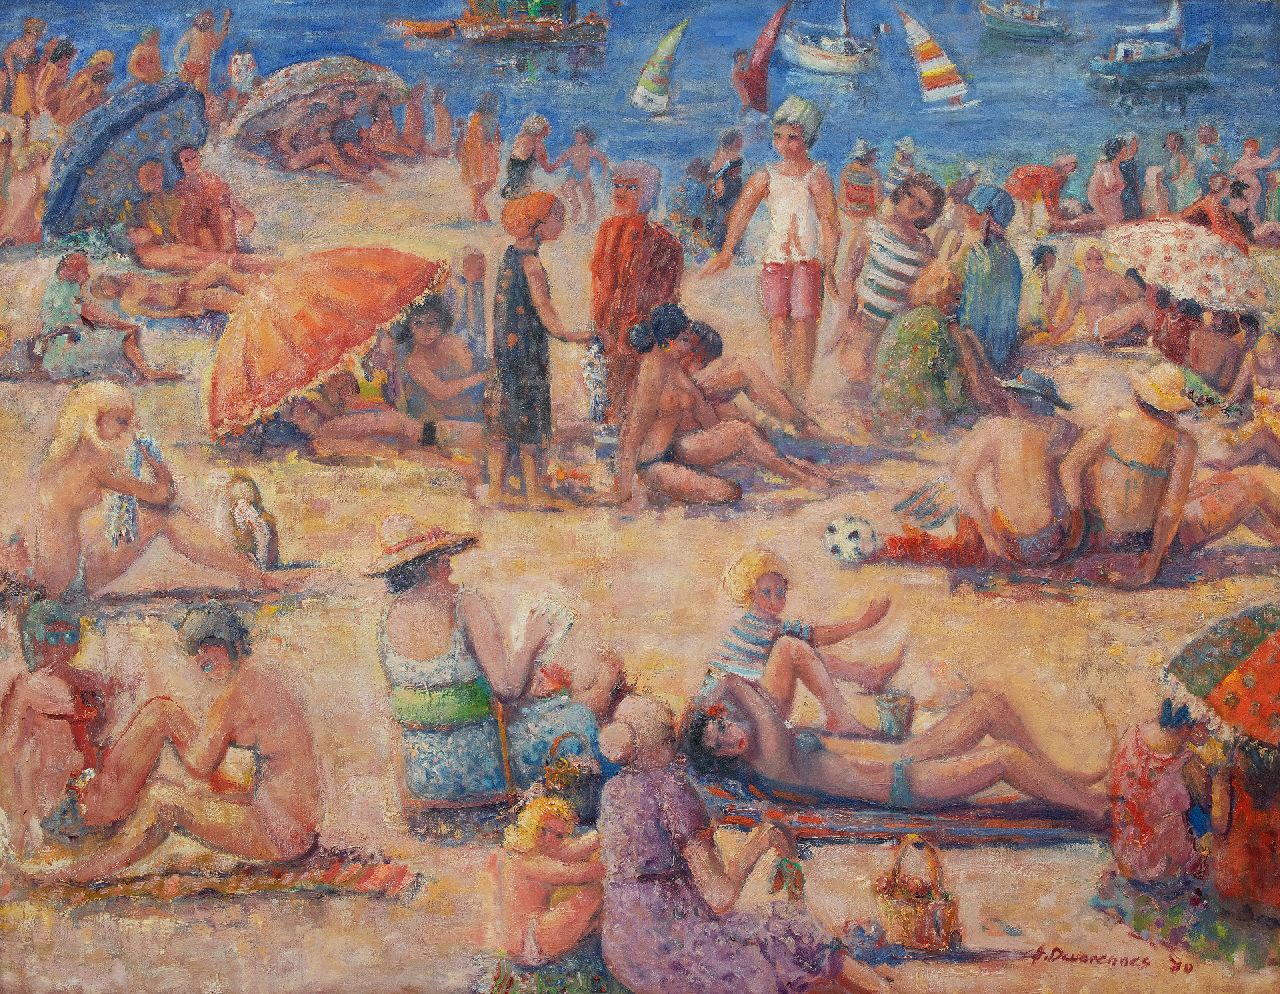 Charly Devarennes | On the beach, Collioure, oil on canvas, 105.0 x 134.1 cm, signed l.r. and dated '80